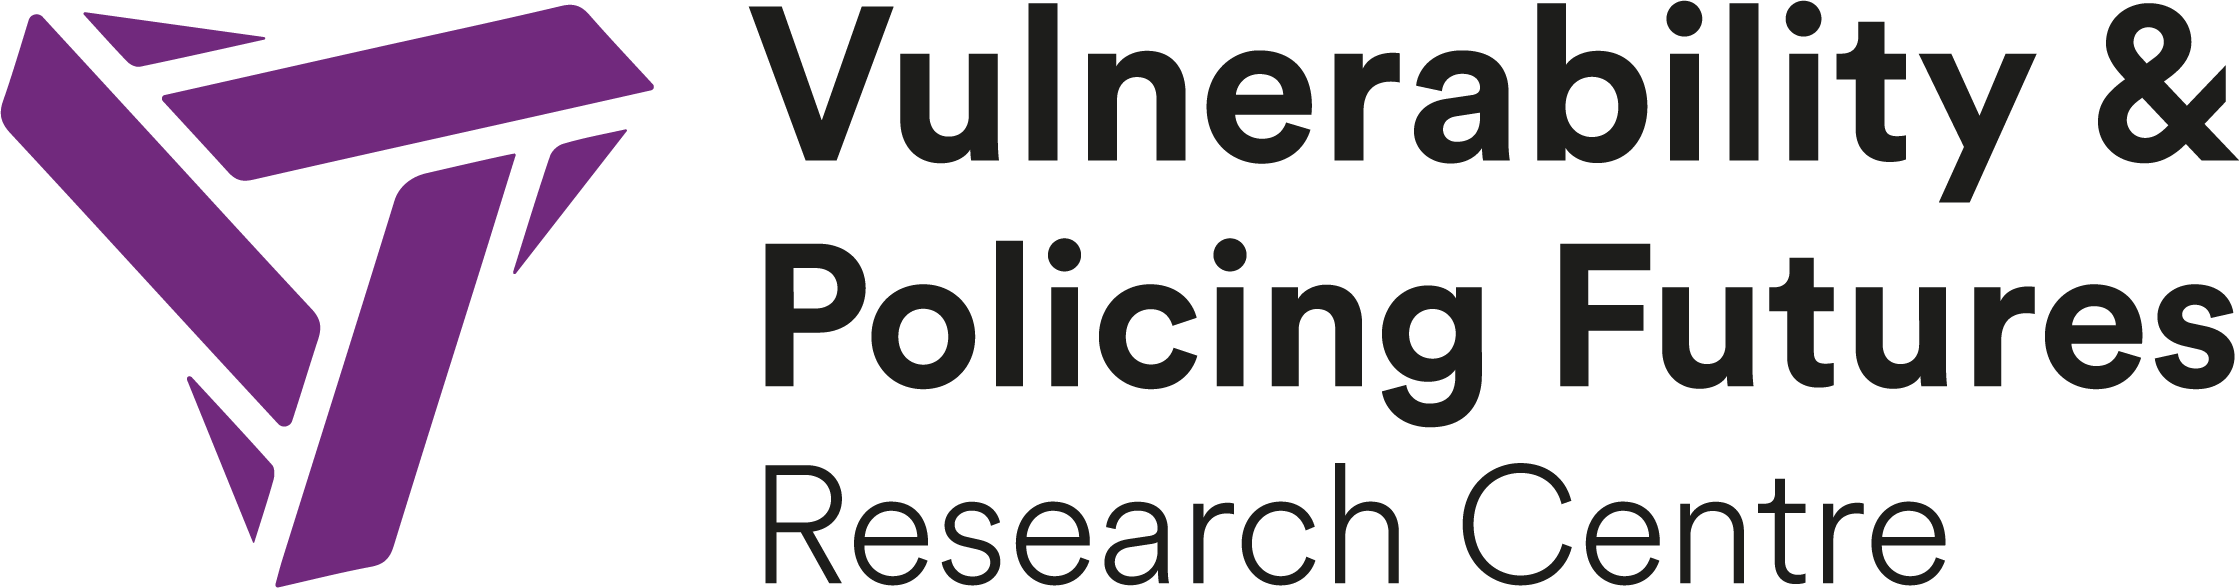 Vulnerability and Policing Futures Research Centre